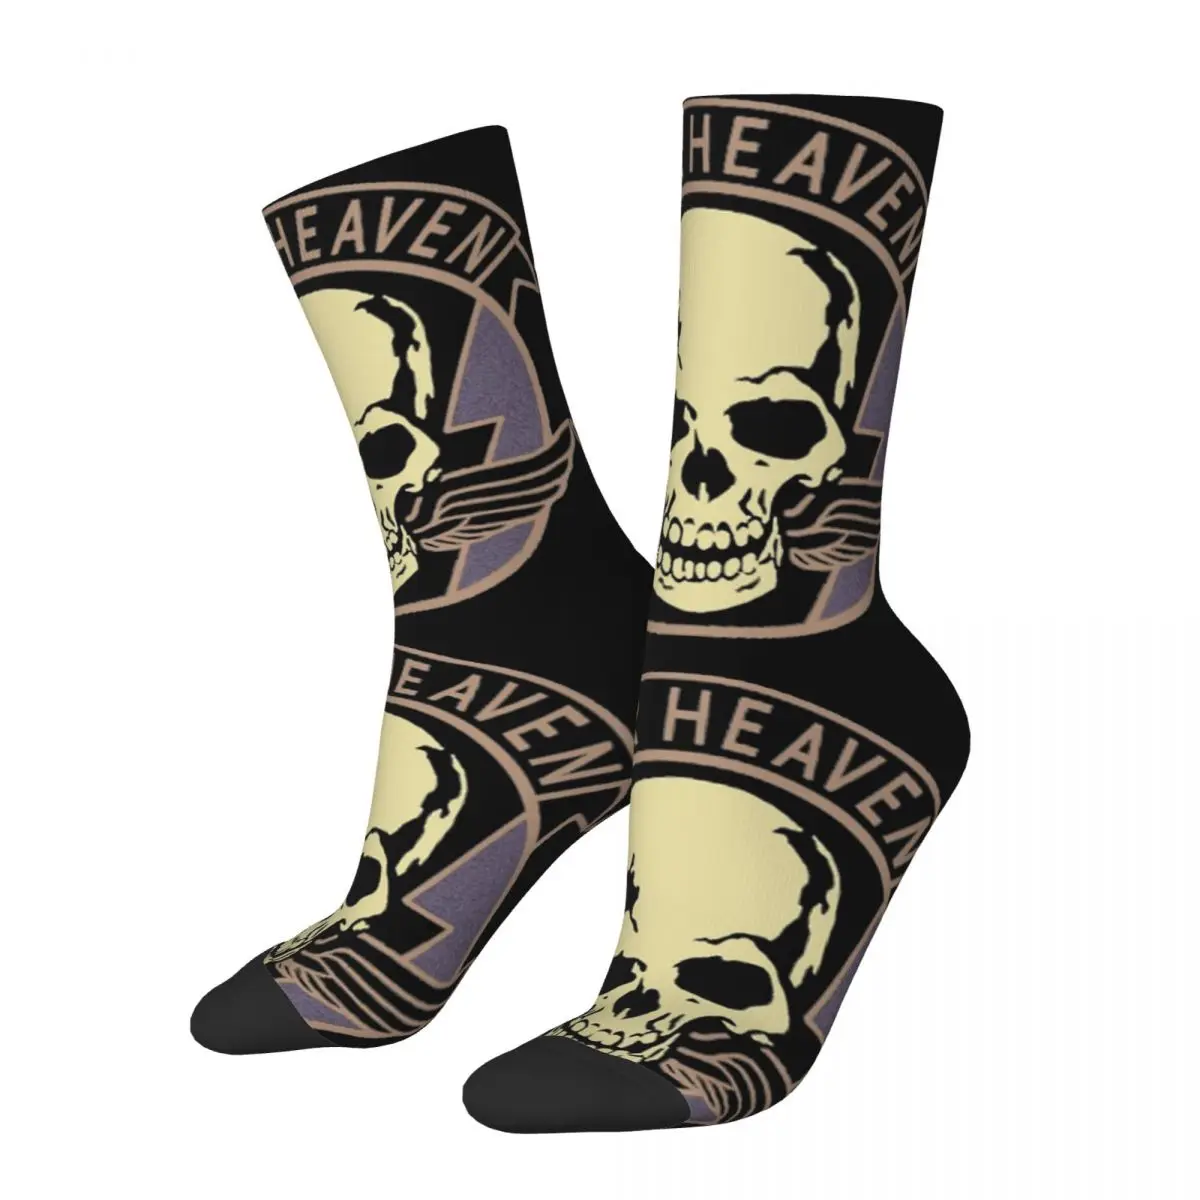 Metal Gear Solid V Design Socks Product for Male Sweat Absorbing Sock - Metal Gear Solid Store